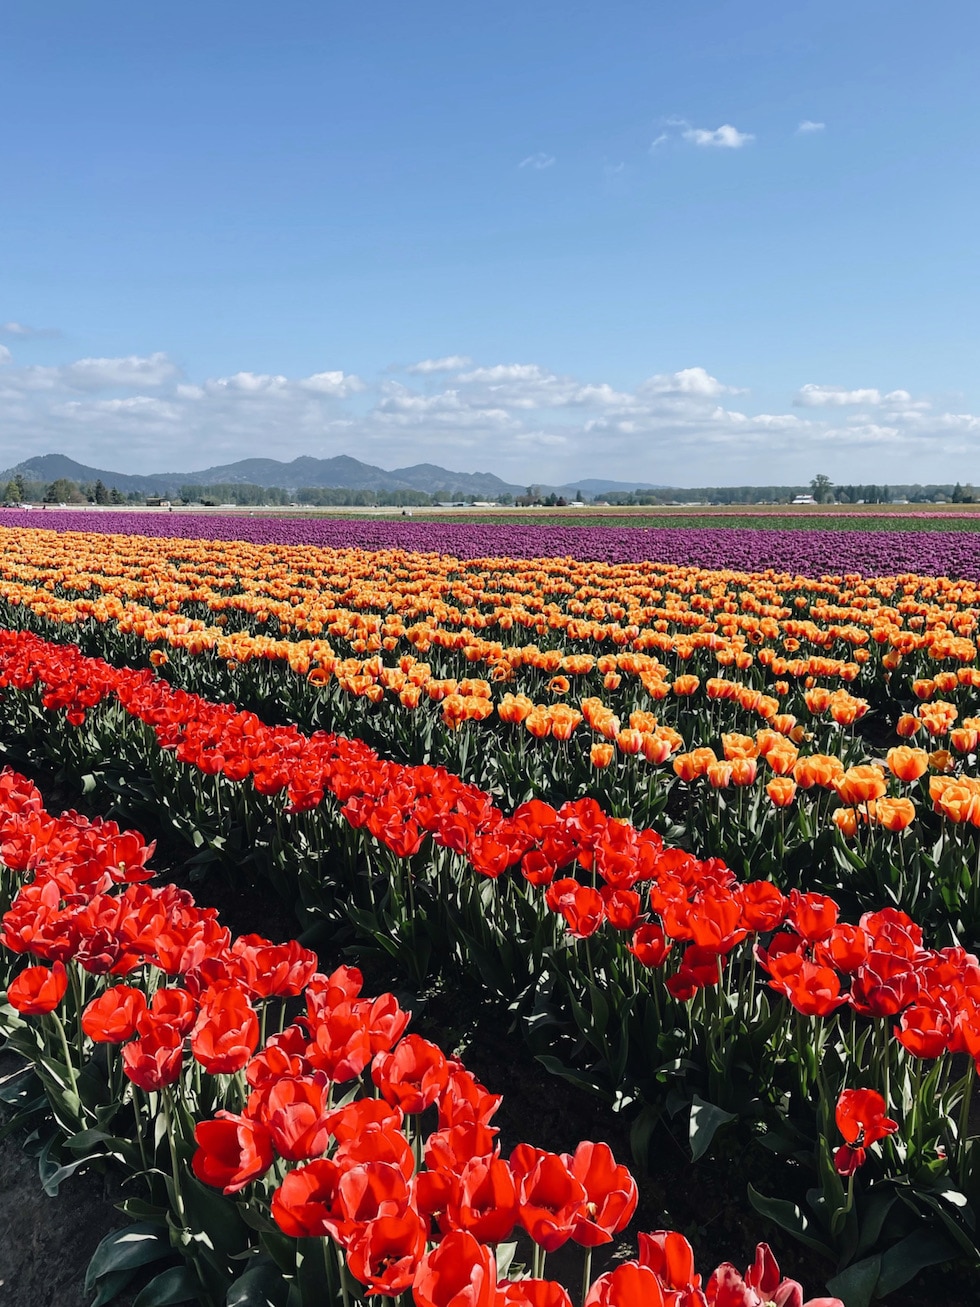 Out to See Tulip Festival Roozengaarde (Washington State) The